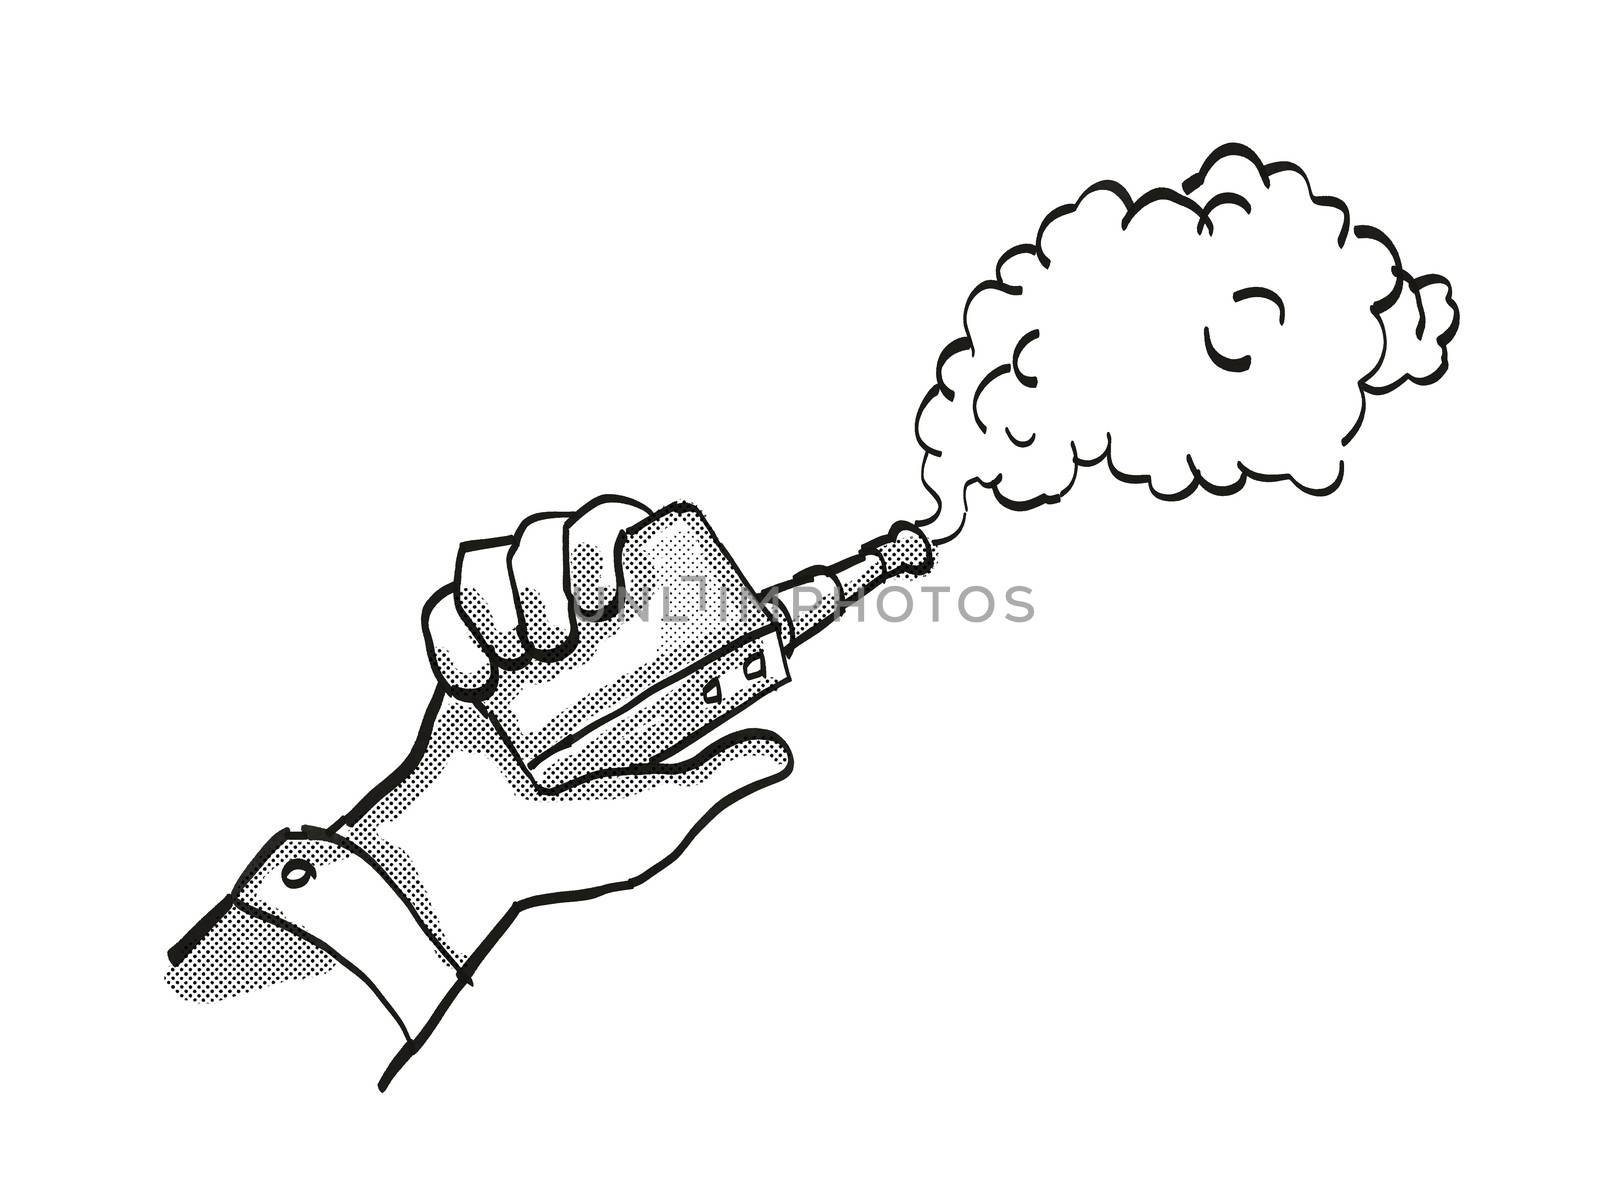 Tattoo cartoon style drawing illustration of a hand holding vape electronic cigarette or vaper smoking with puff of smoke on isolated background done in black and white.